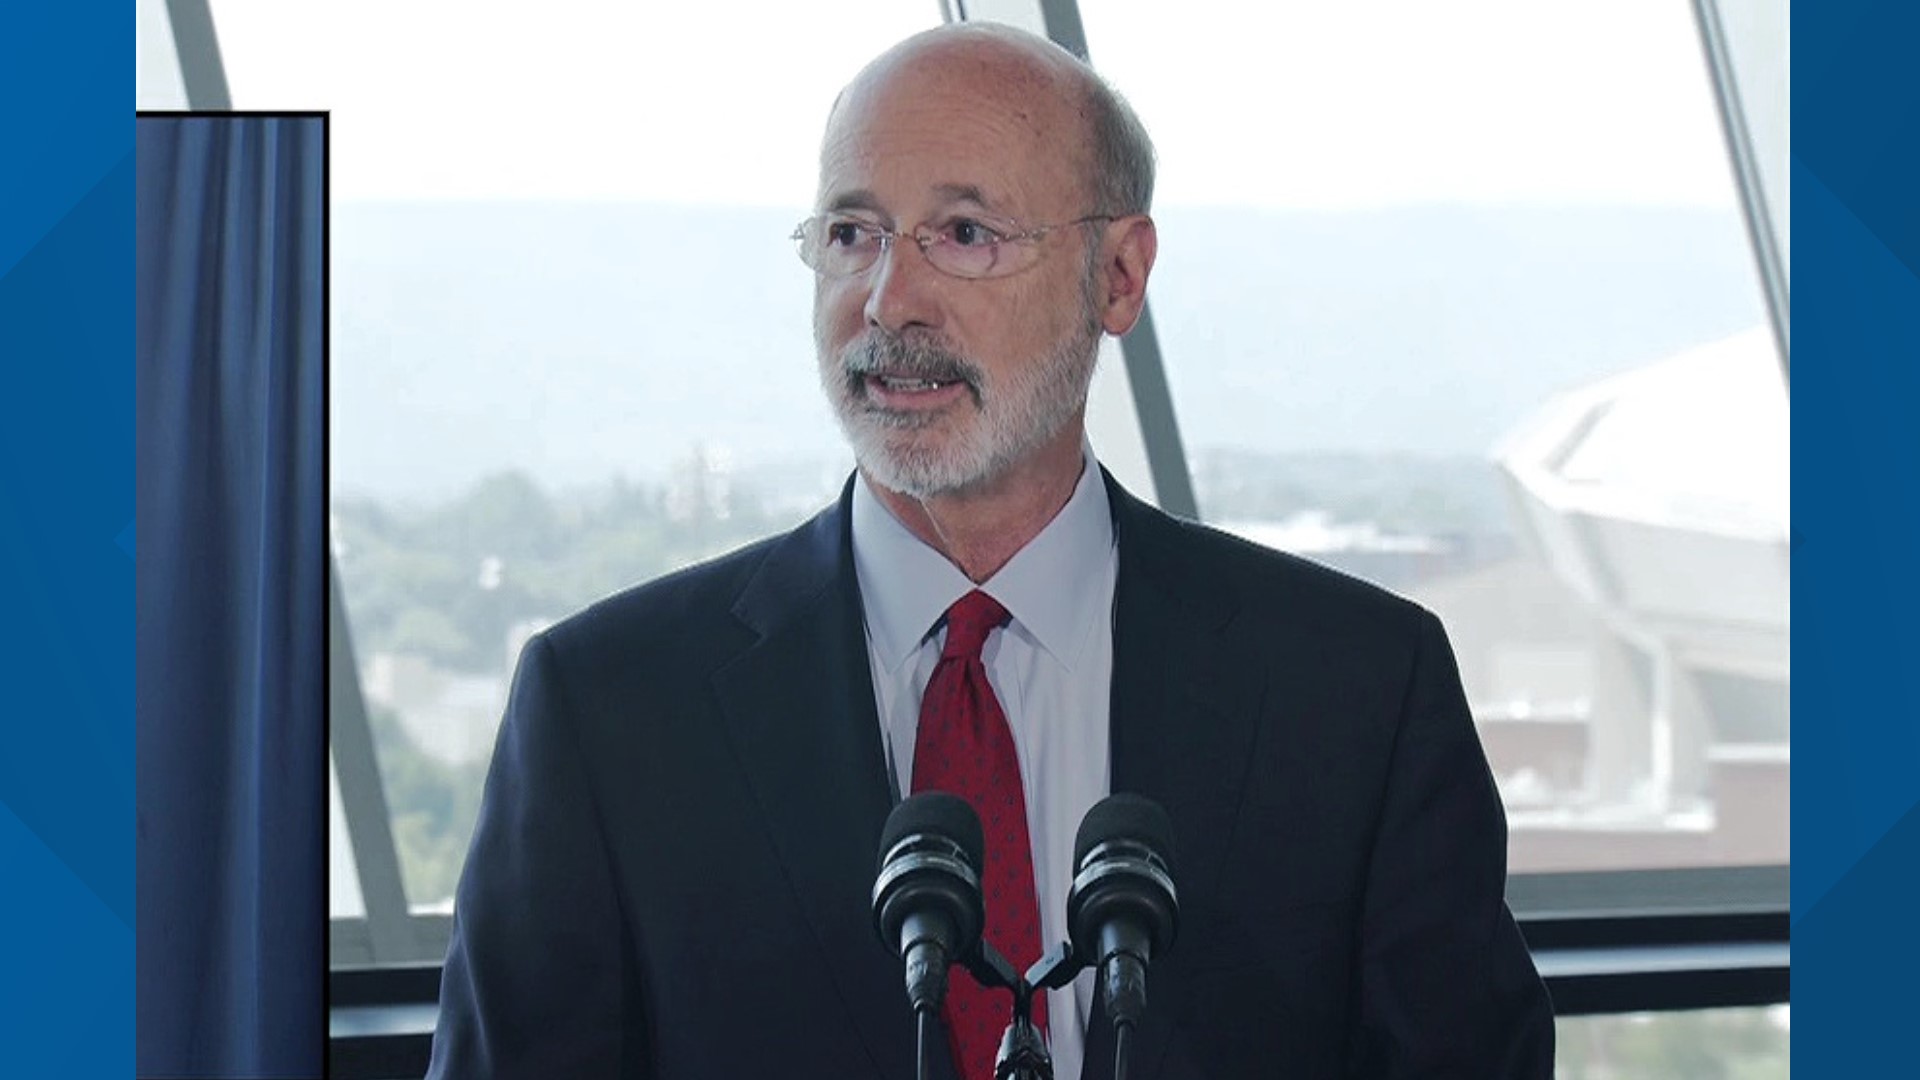 Pennsylvania's governor posted on Facebook after the Supreme Court refused to block a Texas abortion law.